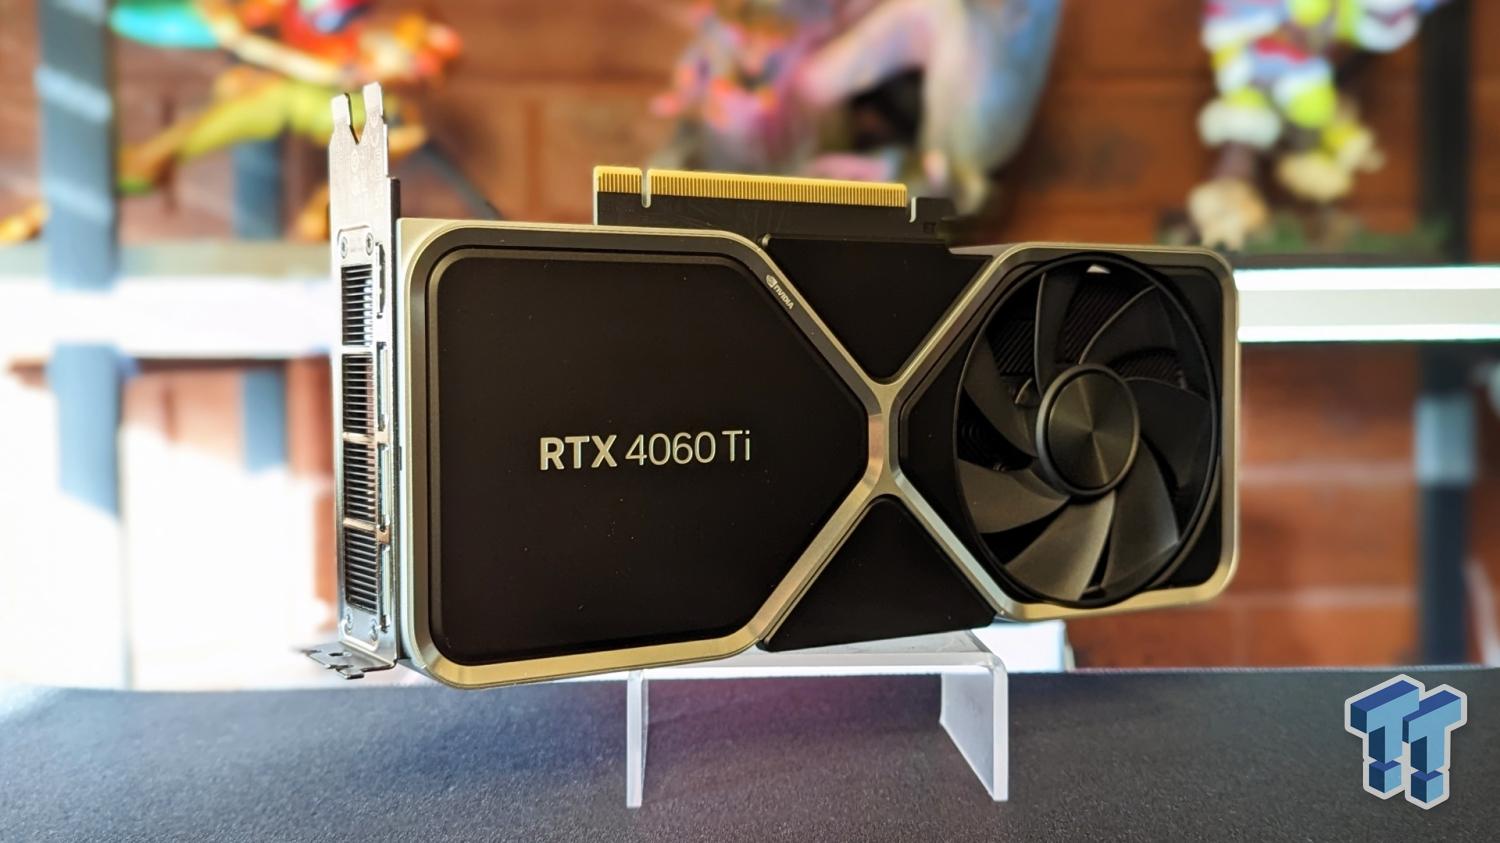 NVIDIA GeForce RTX 4060 Ti Founders Edition Review - DLSS3 Frame Generation